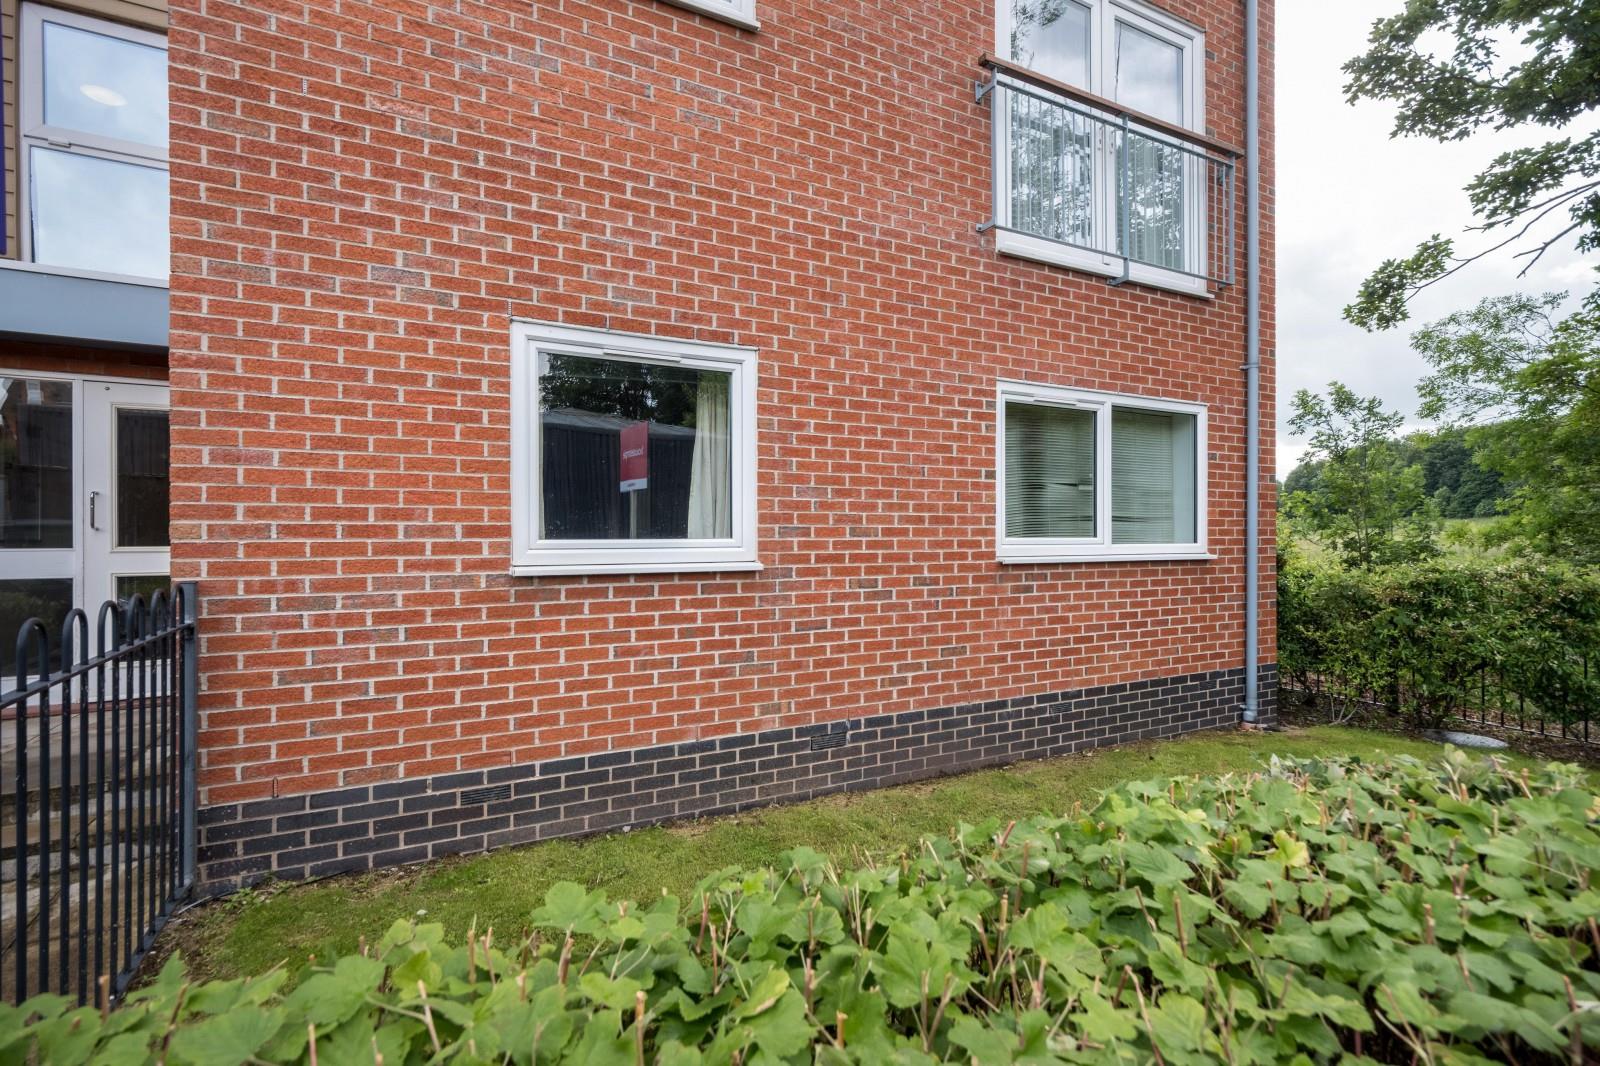 2 bedroom  Flat for Sale in Northwich